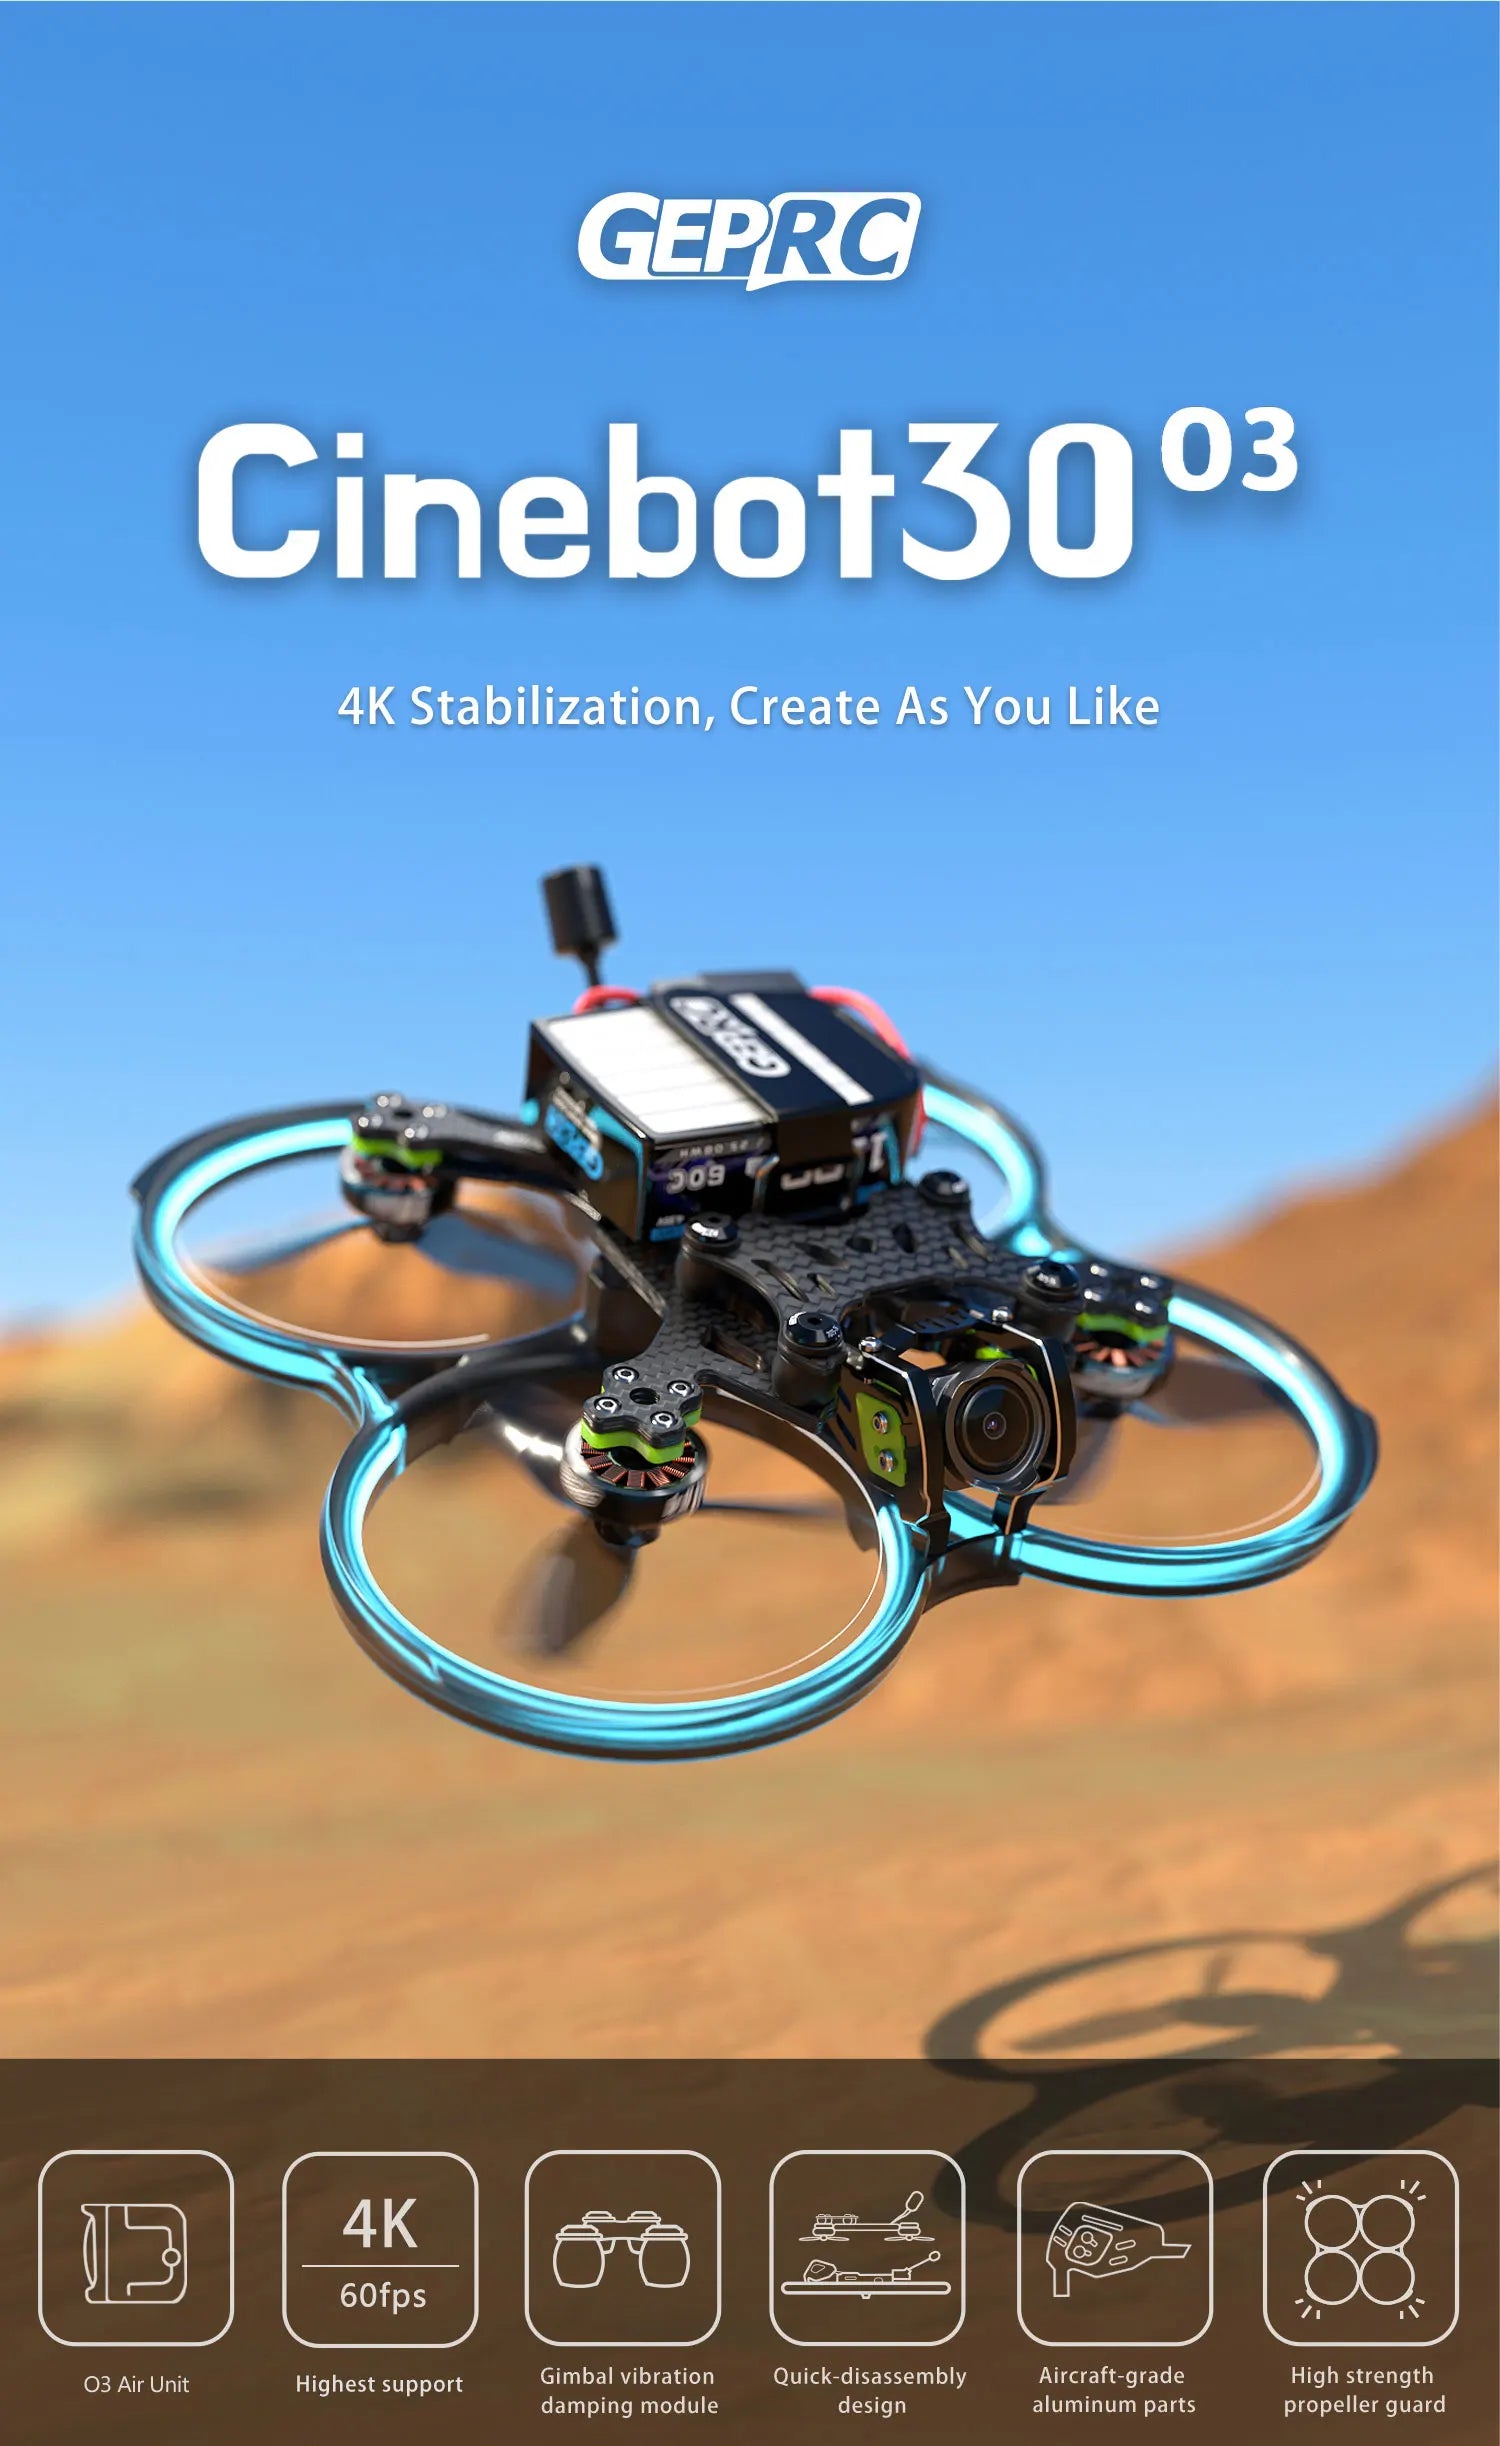 GEPRC Cinebot30 FPV Drone, GEPRC Cinebot30o3 4K Stabilization, Create As You Like 4